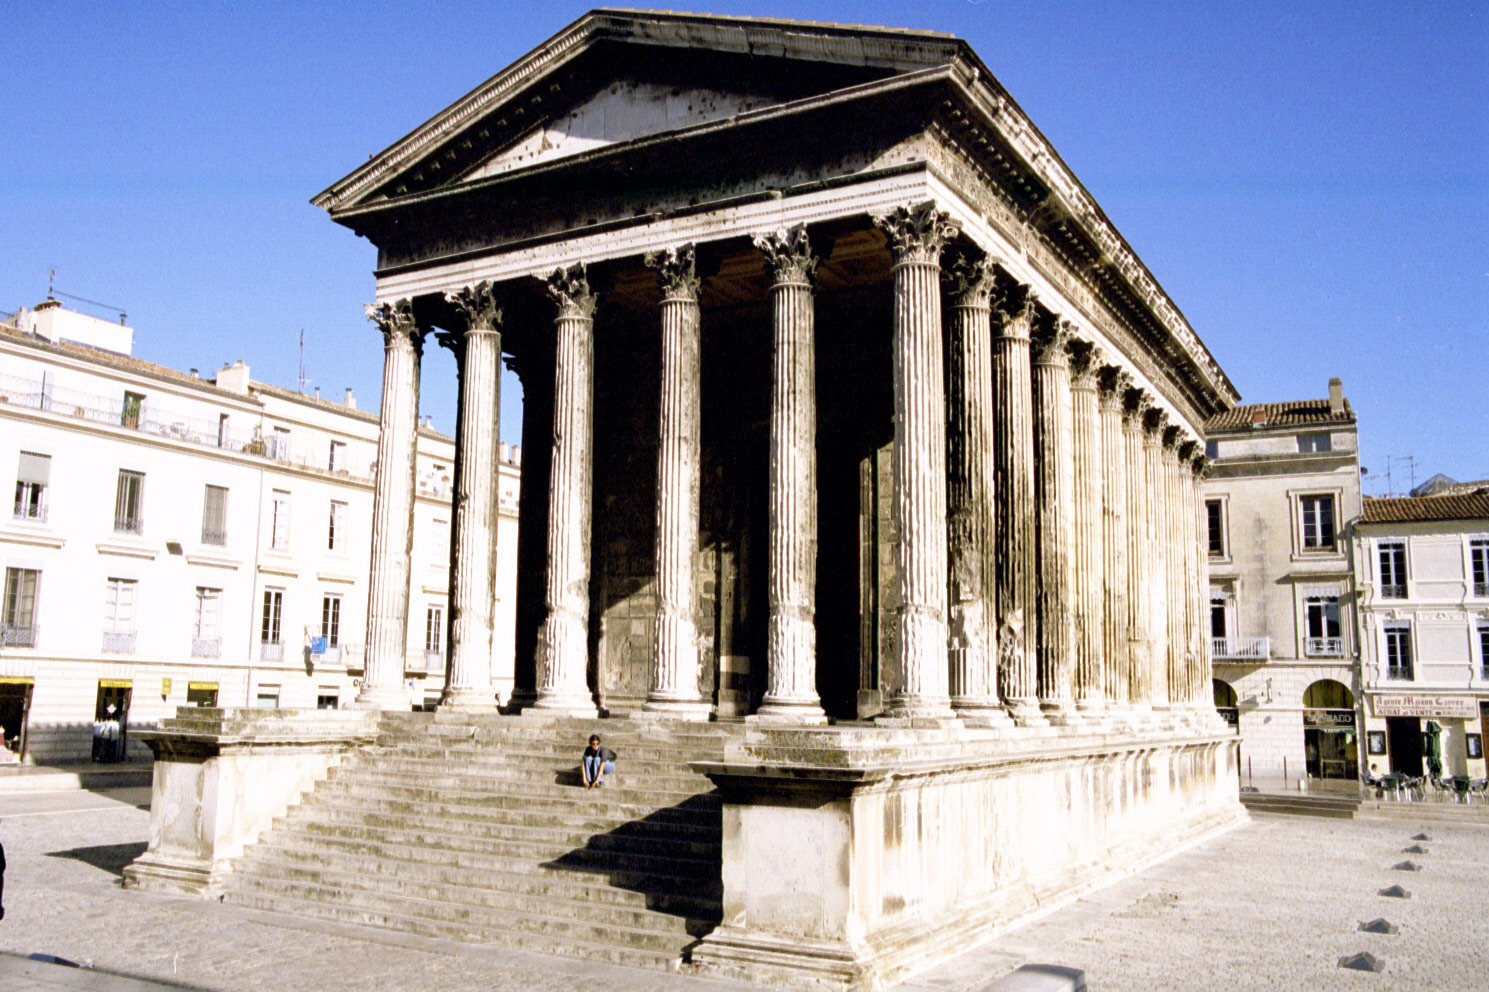 maison carree at nimes. called the Maison Carrée,